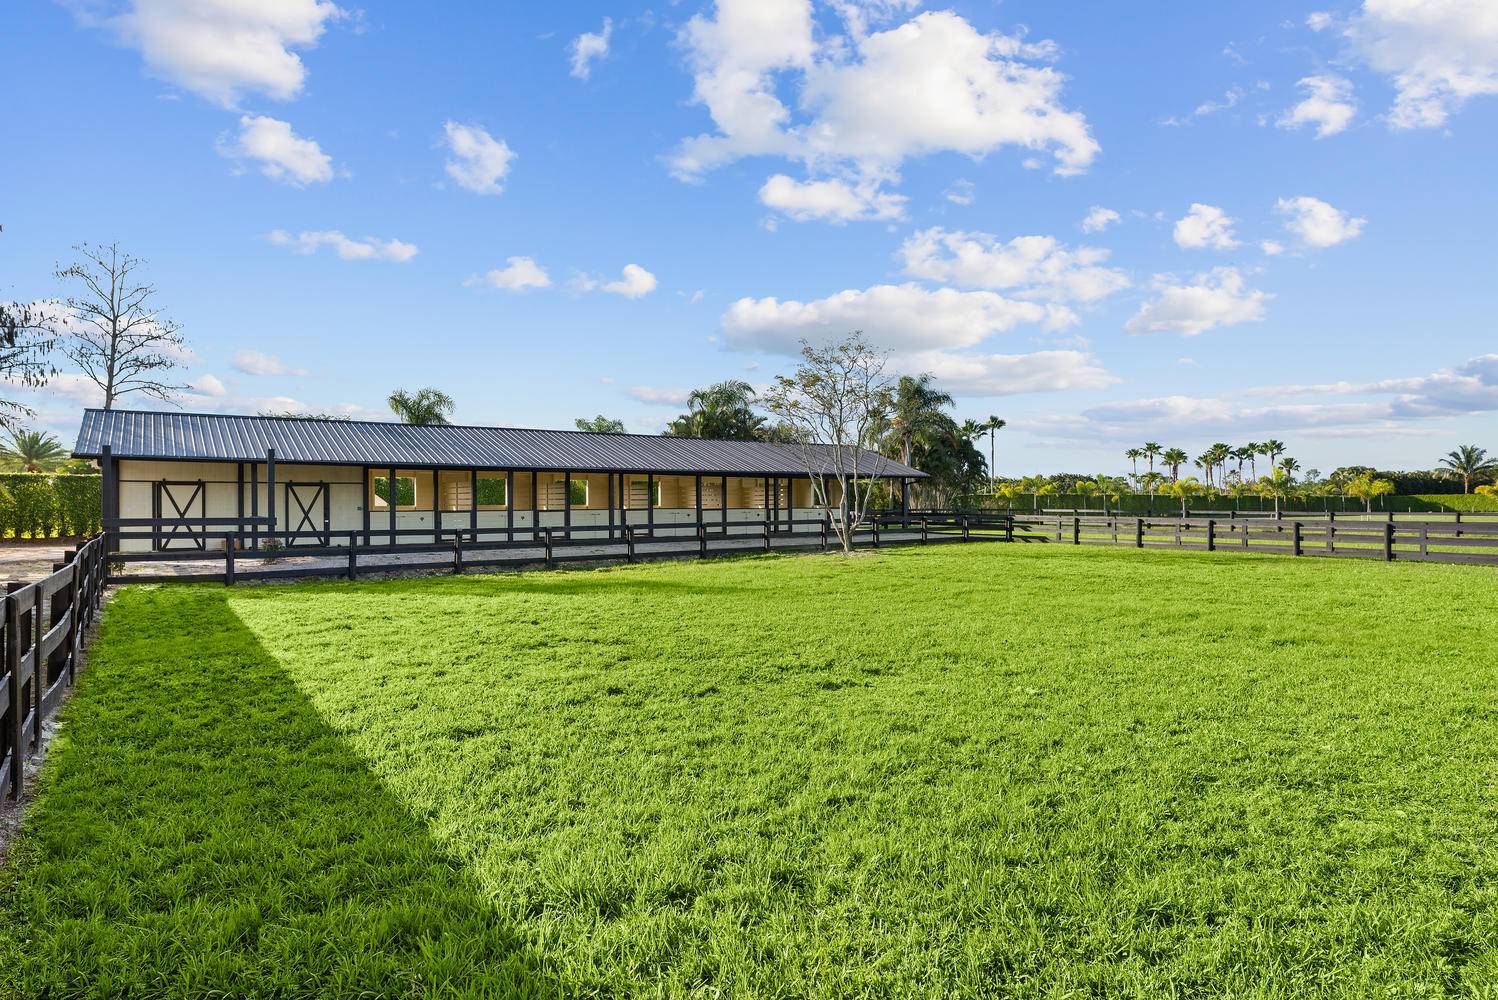 Gorgeous equestrian facility offering 6 stall open shed row barn for seasonal rent.